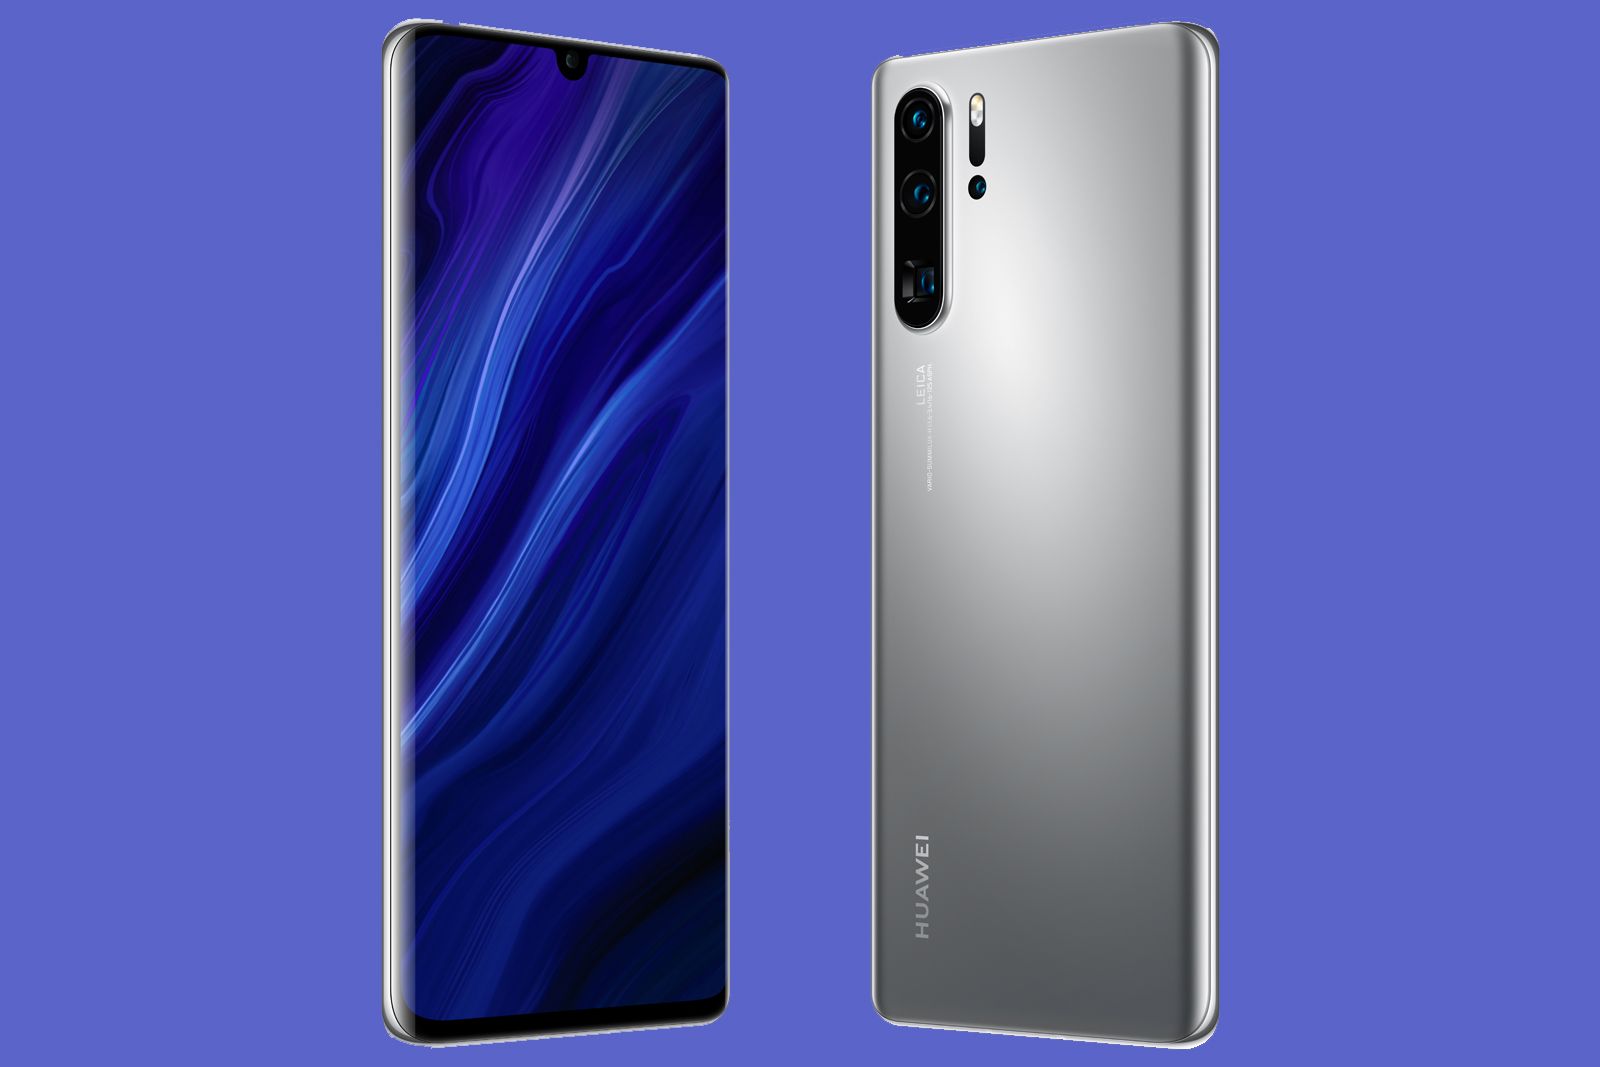 Huawei is back with the P30 Pro New Edition - and yes it still has Google apps image 1